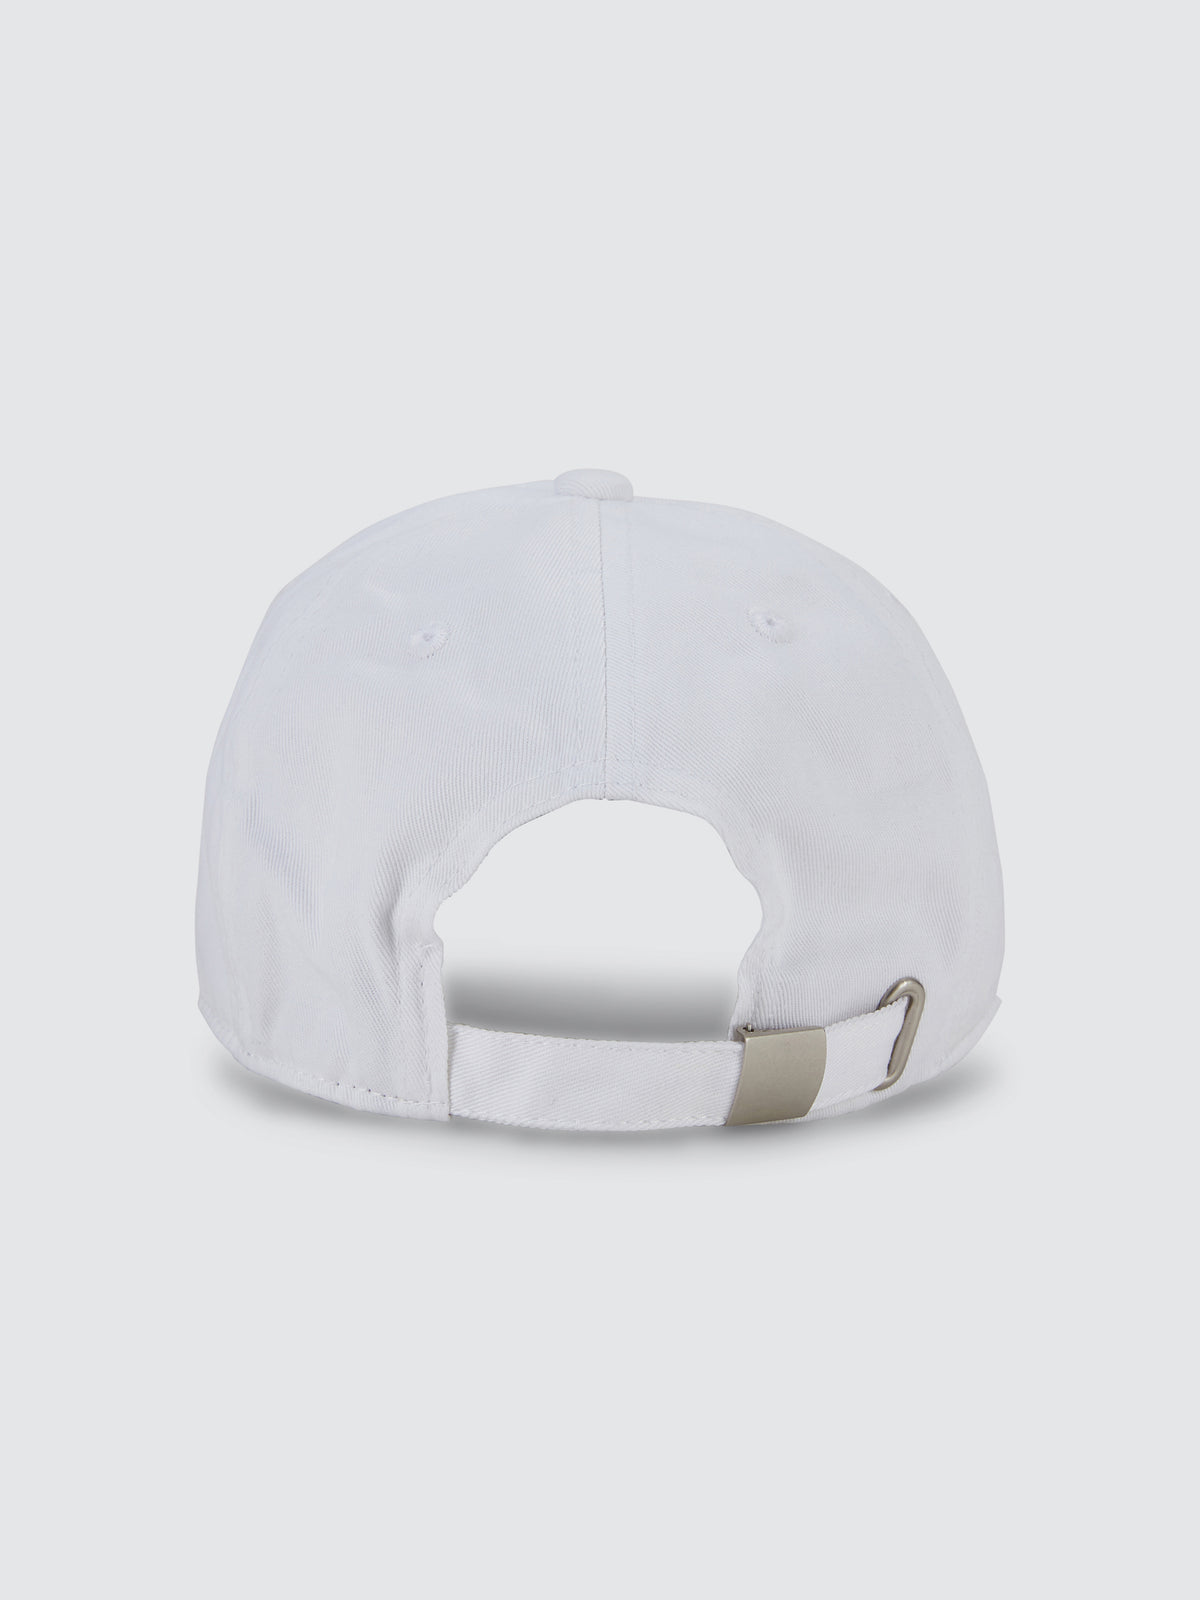 Two Blind Brothers - Gift Soft Baseball Cap White